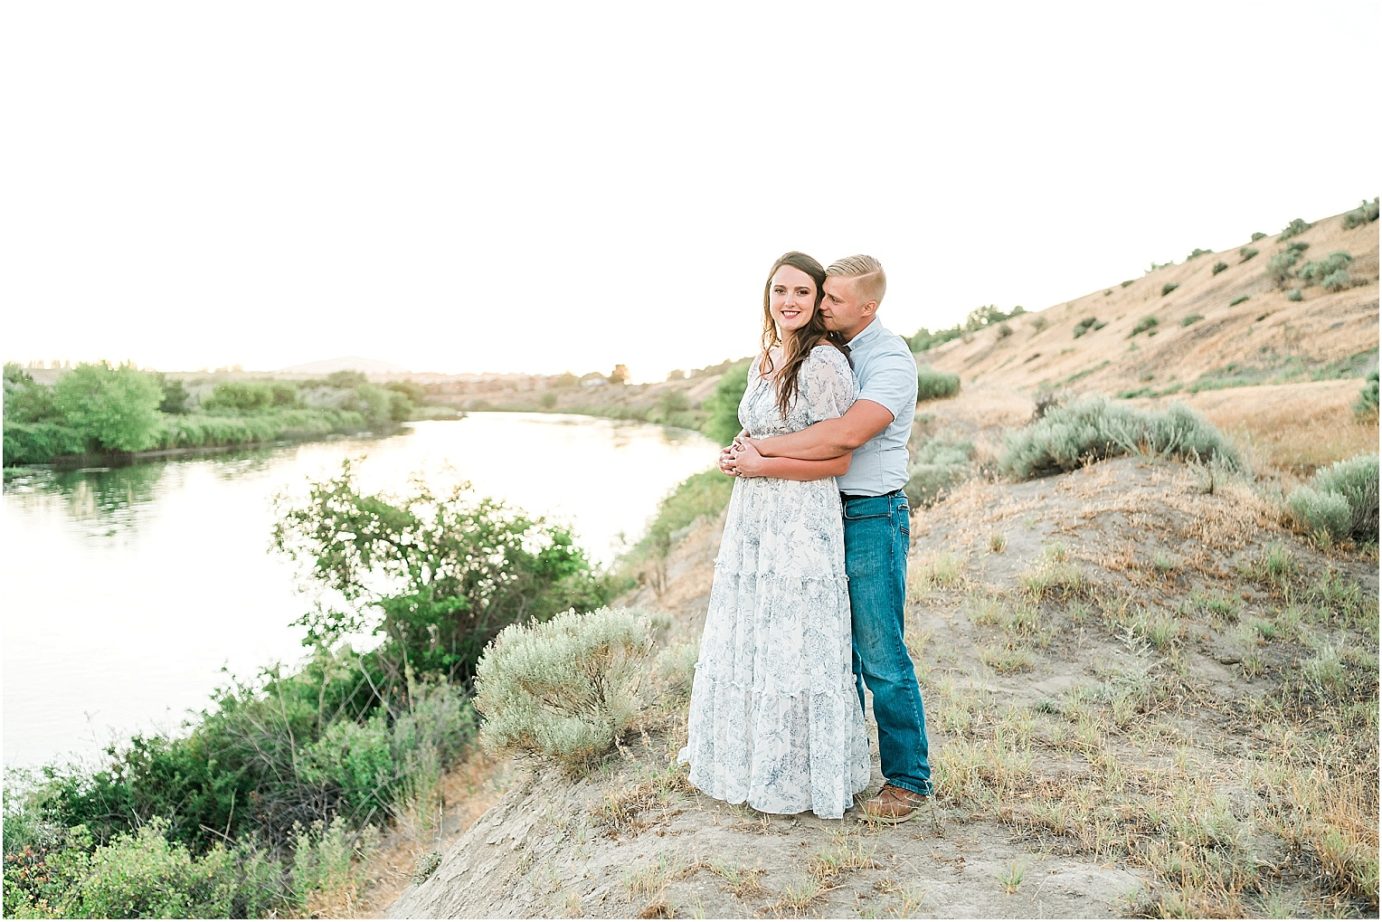 richland engagement session richland photographer Nate and Jacqueline hugging by the river